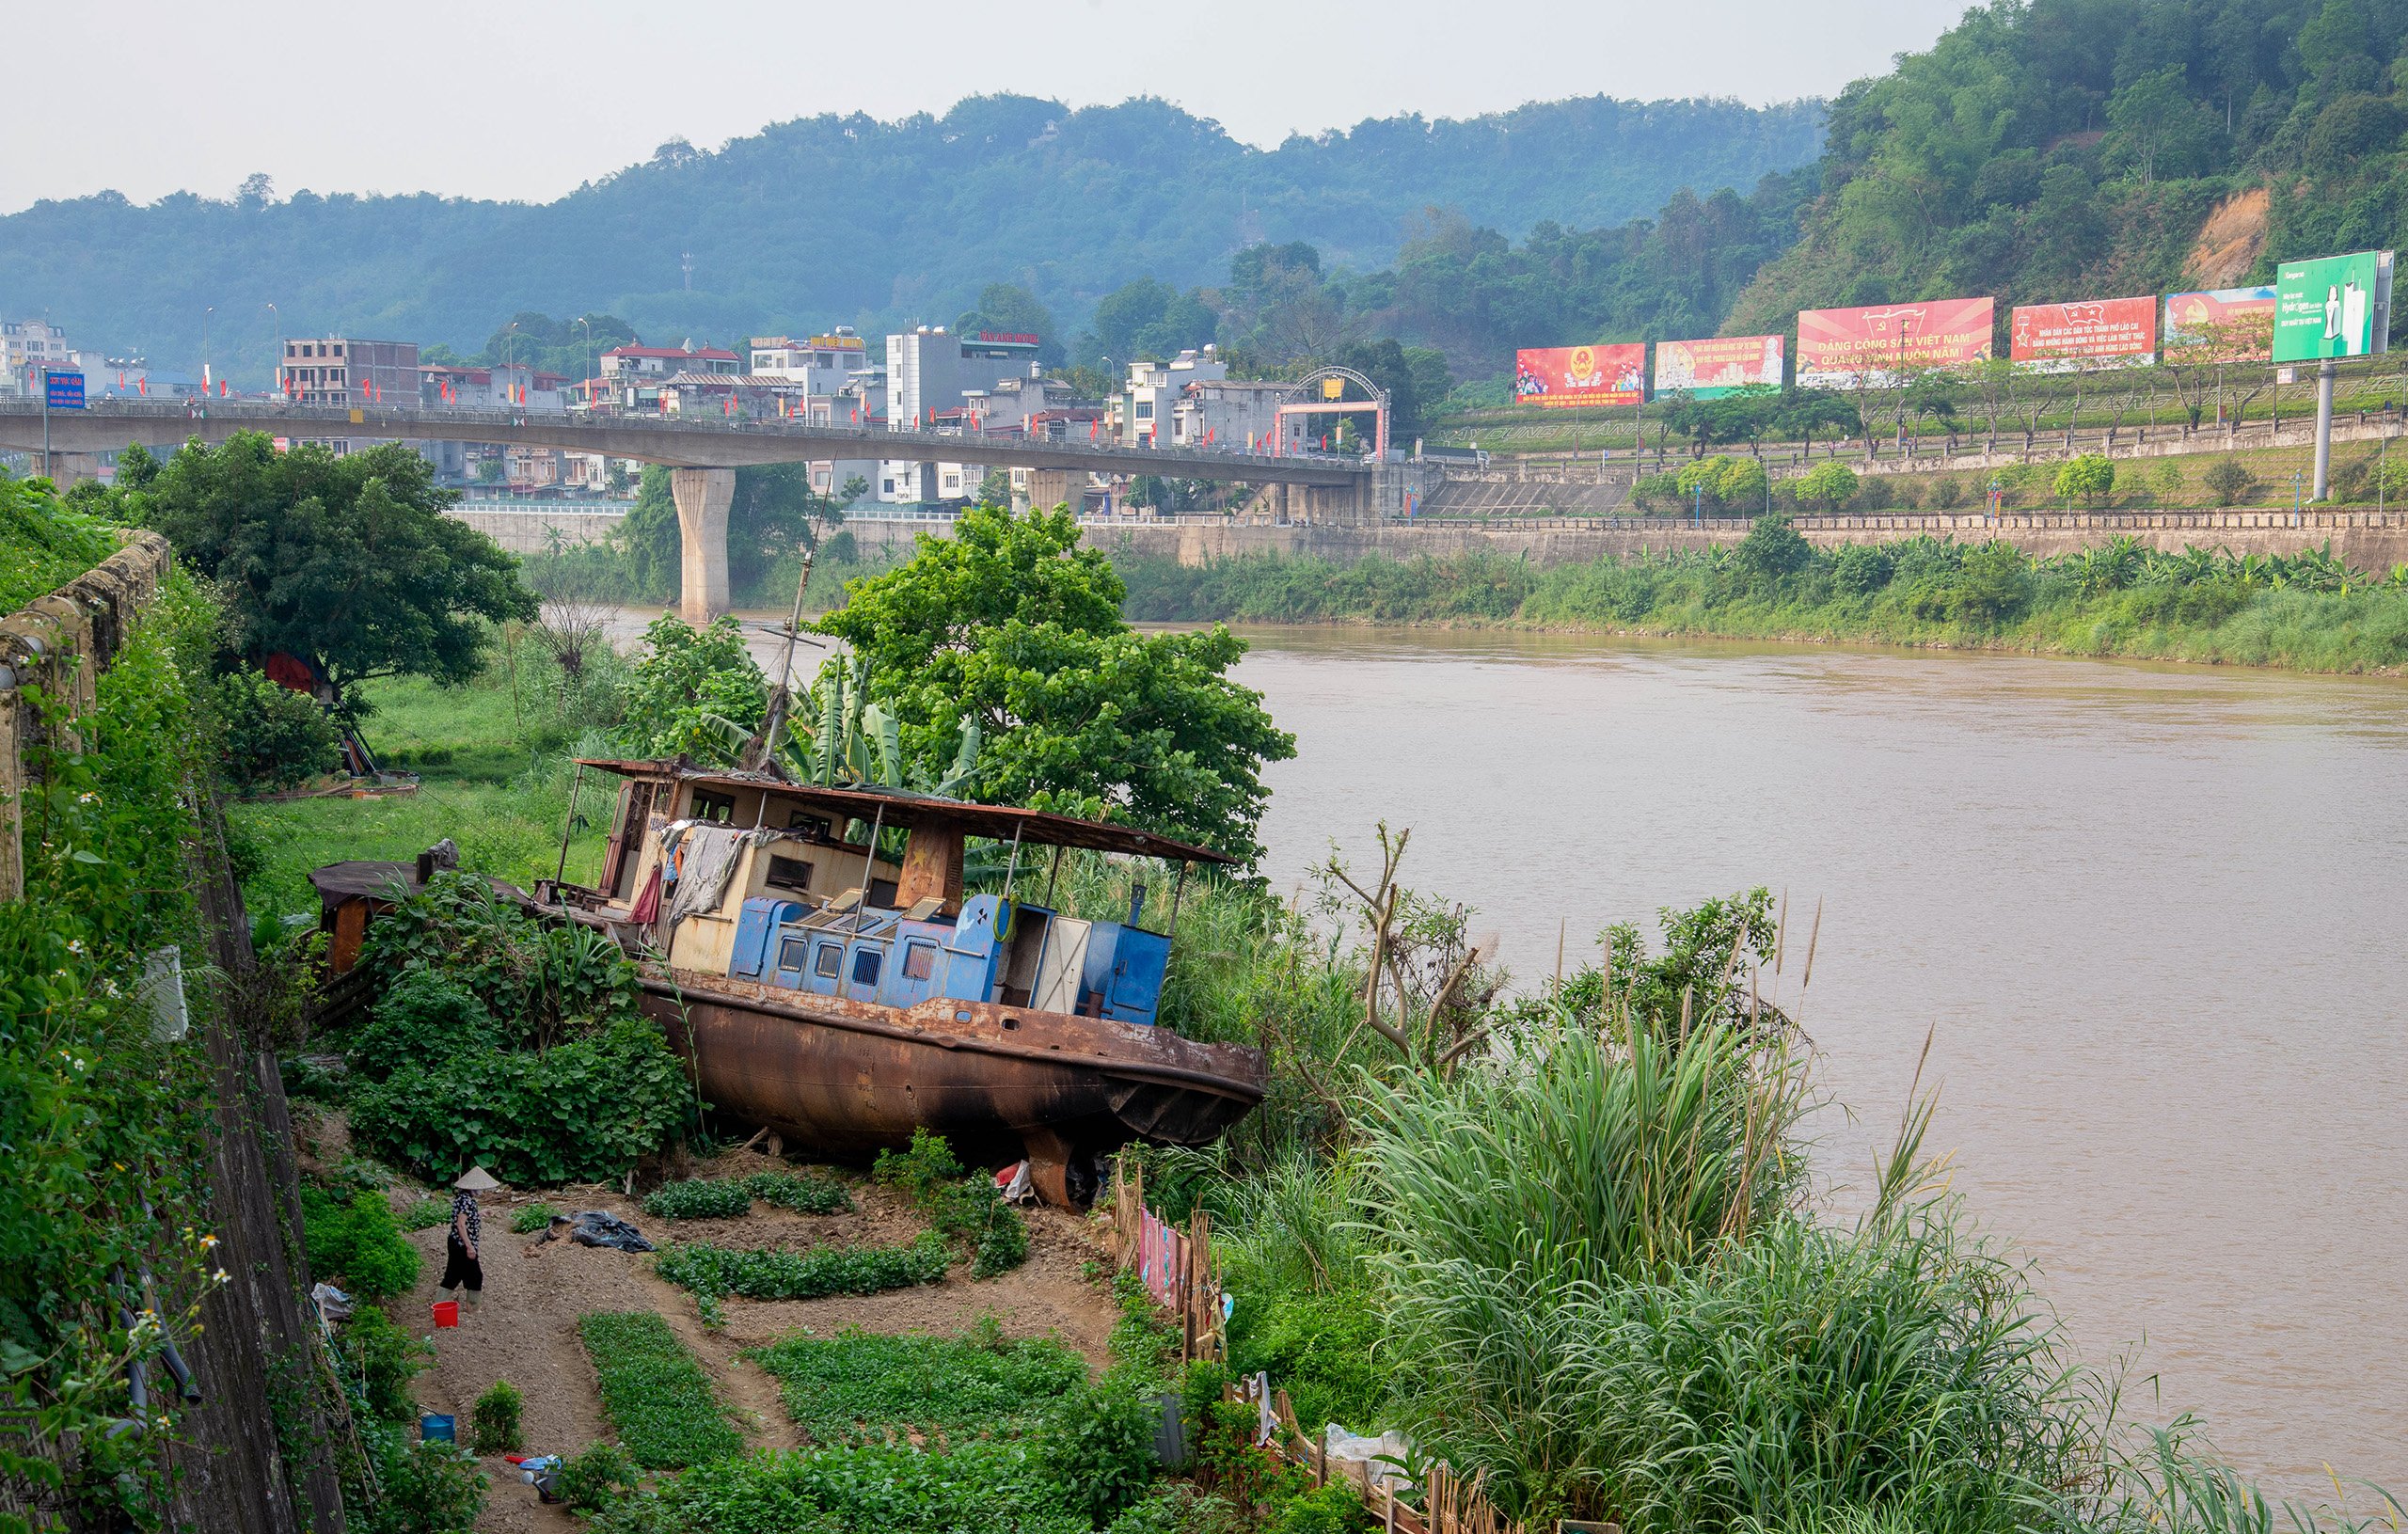 <p>The Red River in the city of Lao Cai in Vietnam, just south of the border with China. This boat had been trapped under the Coc Leu bridge (pictured in the background) for two years before being washed free by a flood in 2020 (Image: Linh Pham)</p>